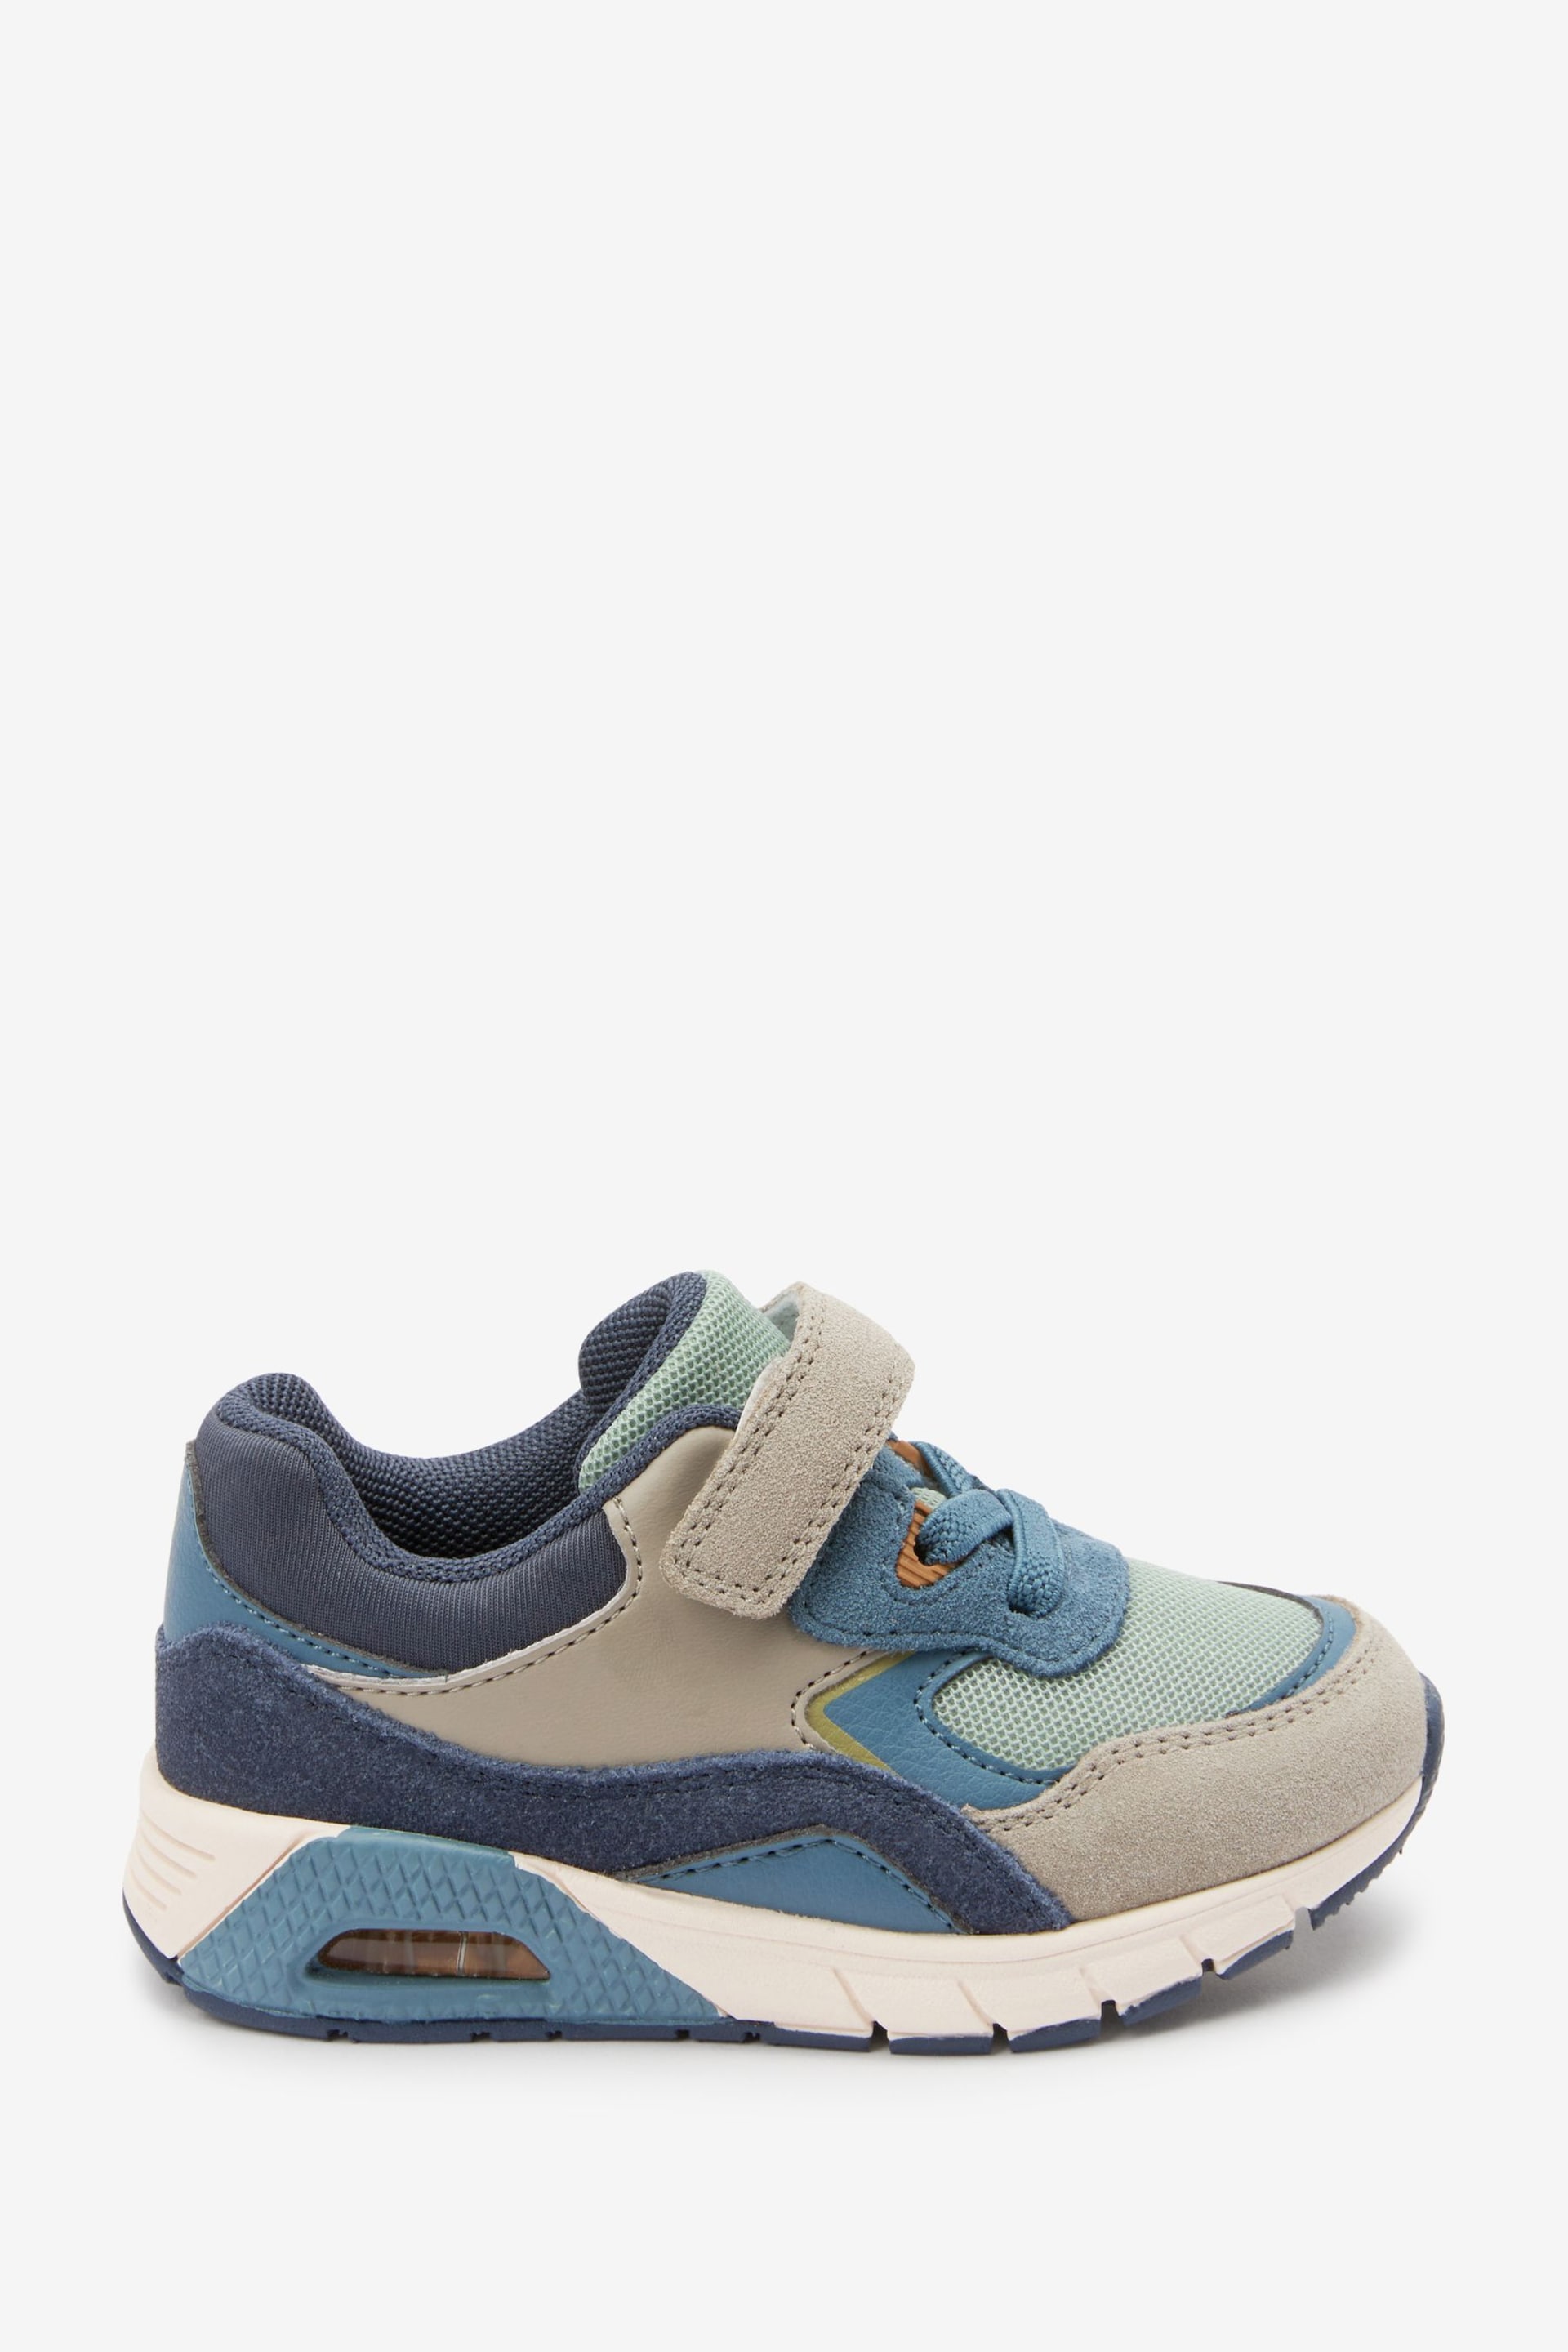 Blue/Green Elastic Lace Trainers - Image 1 of 5